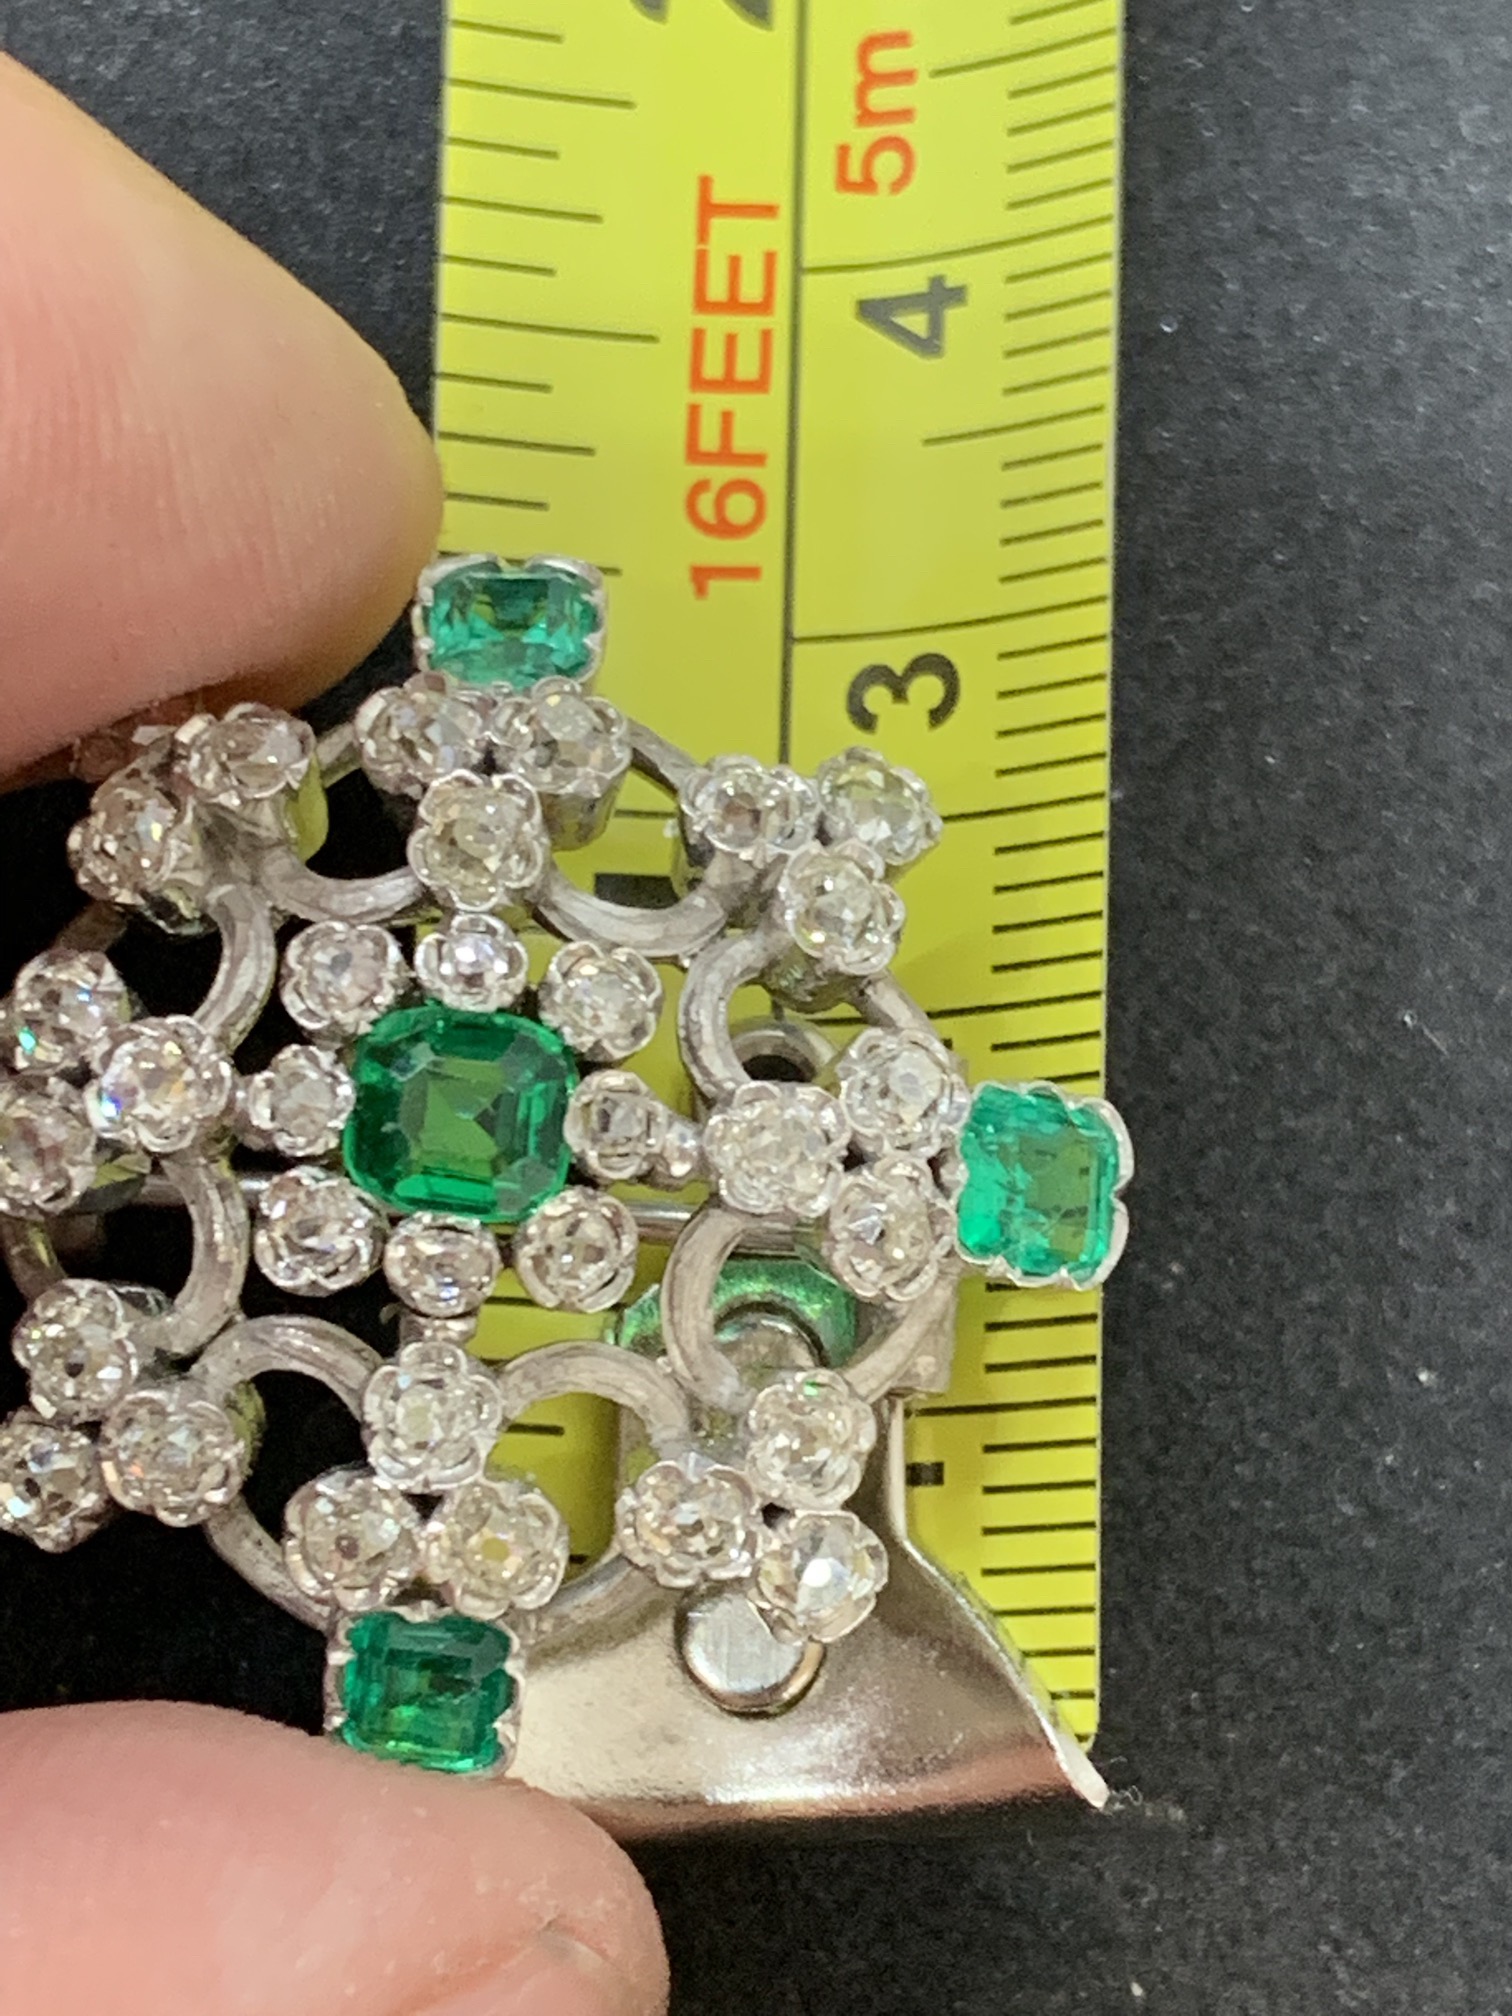 EXQUISITE EMERALD & DIAMOND BROOCH - WHITE METAL TESTED AS AT LEAST 18ct - Image 3 of 3